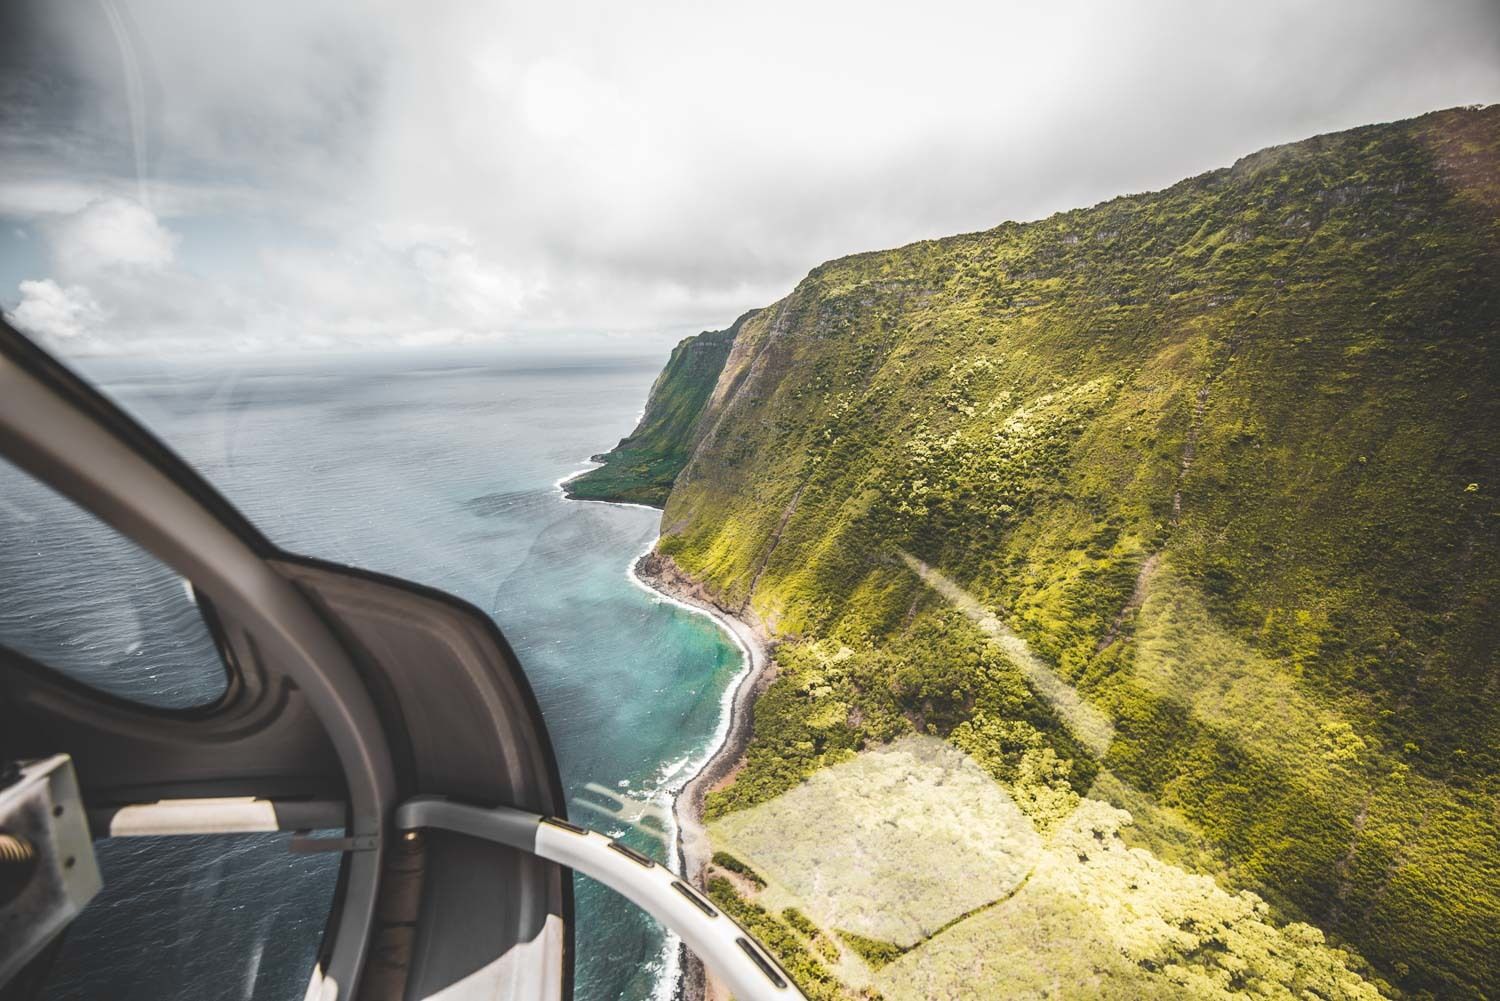 Scenic Helicopter Tour - Maui Itinerary